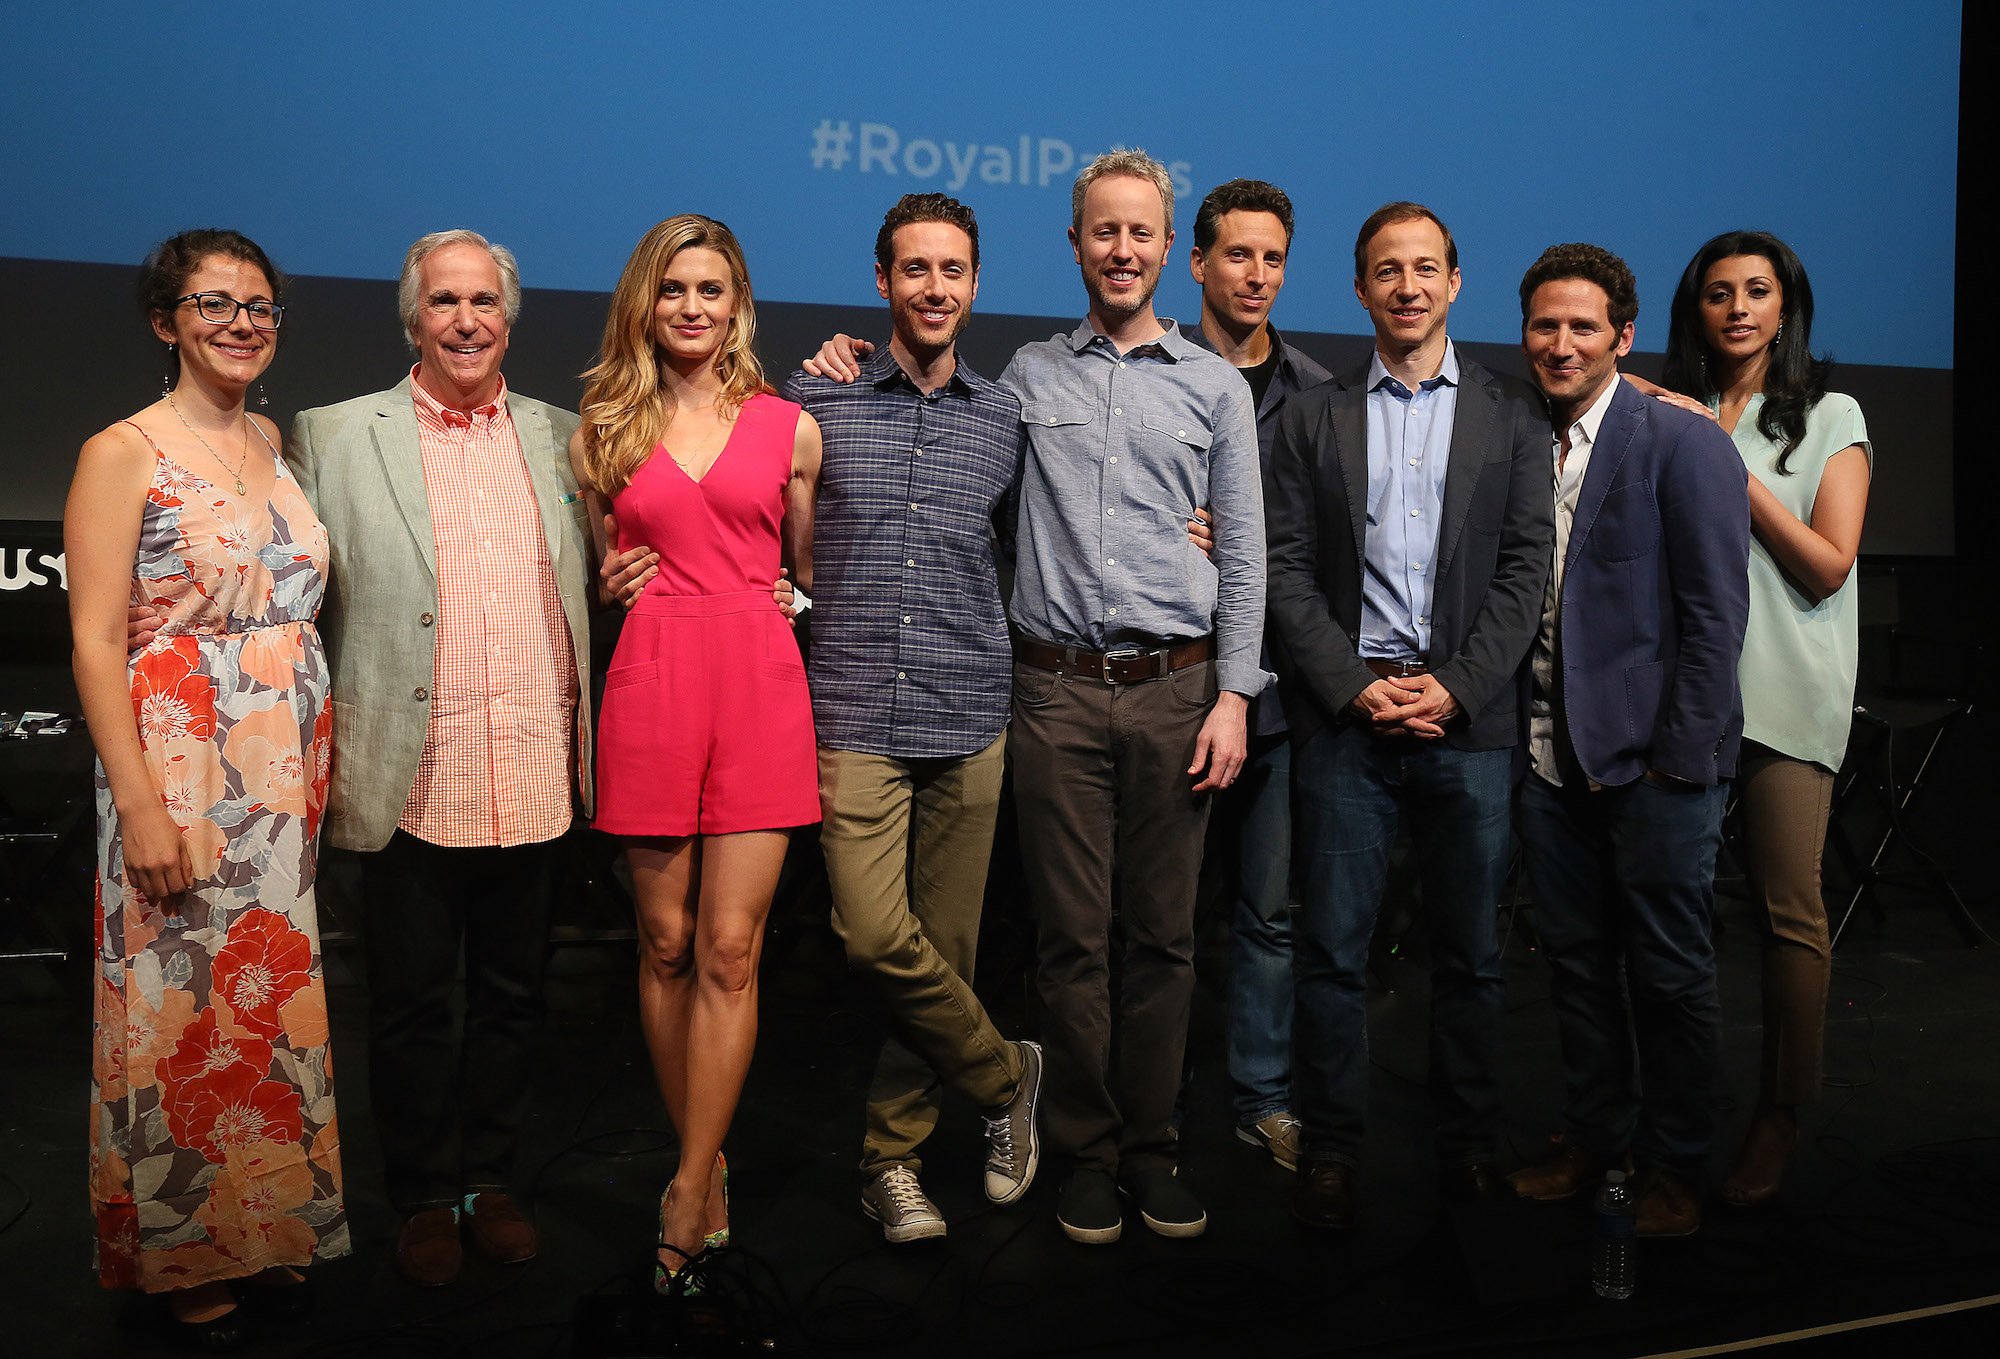 The royals cast of characters